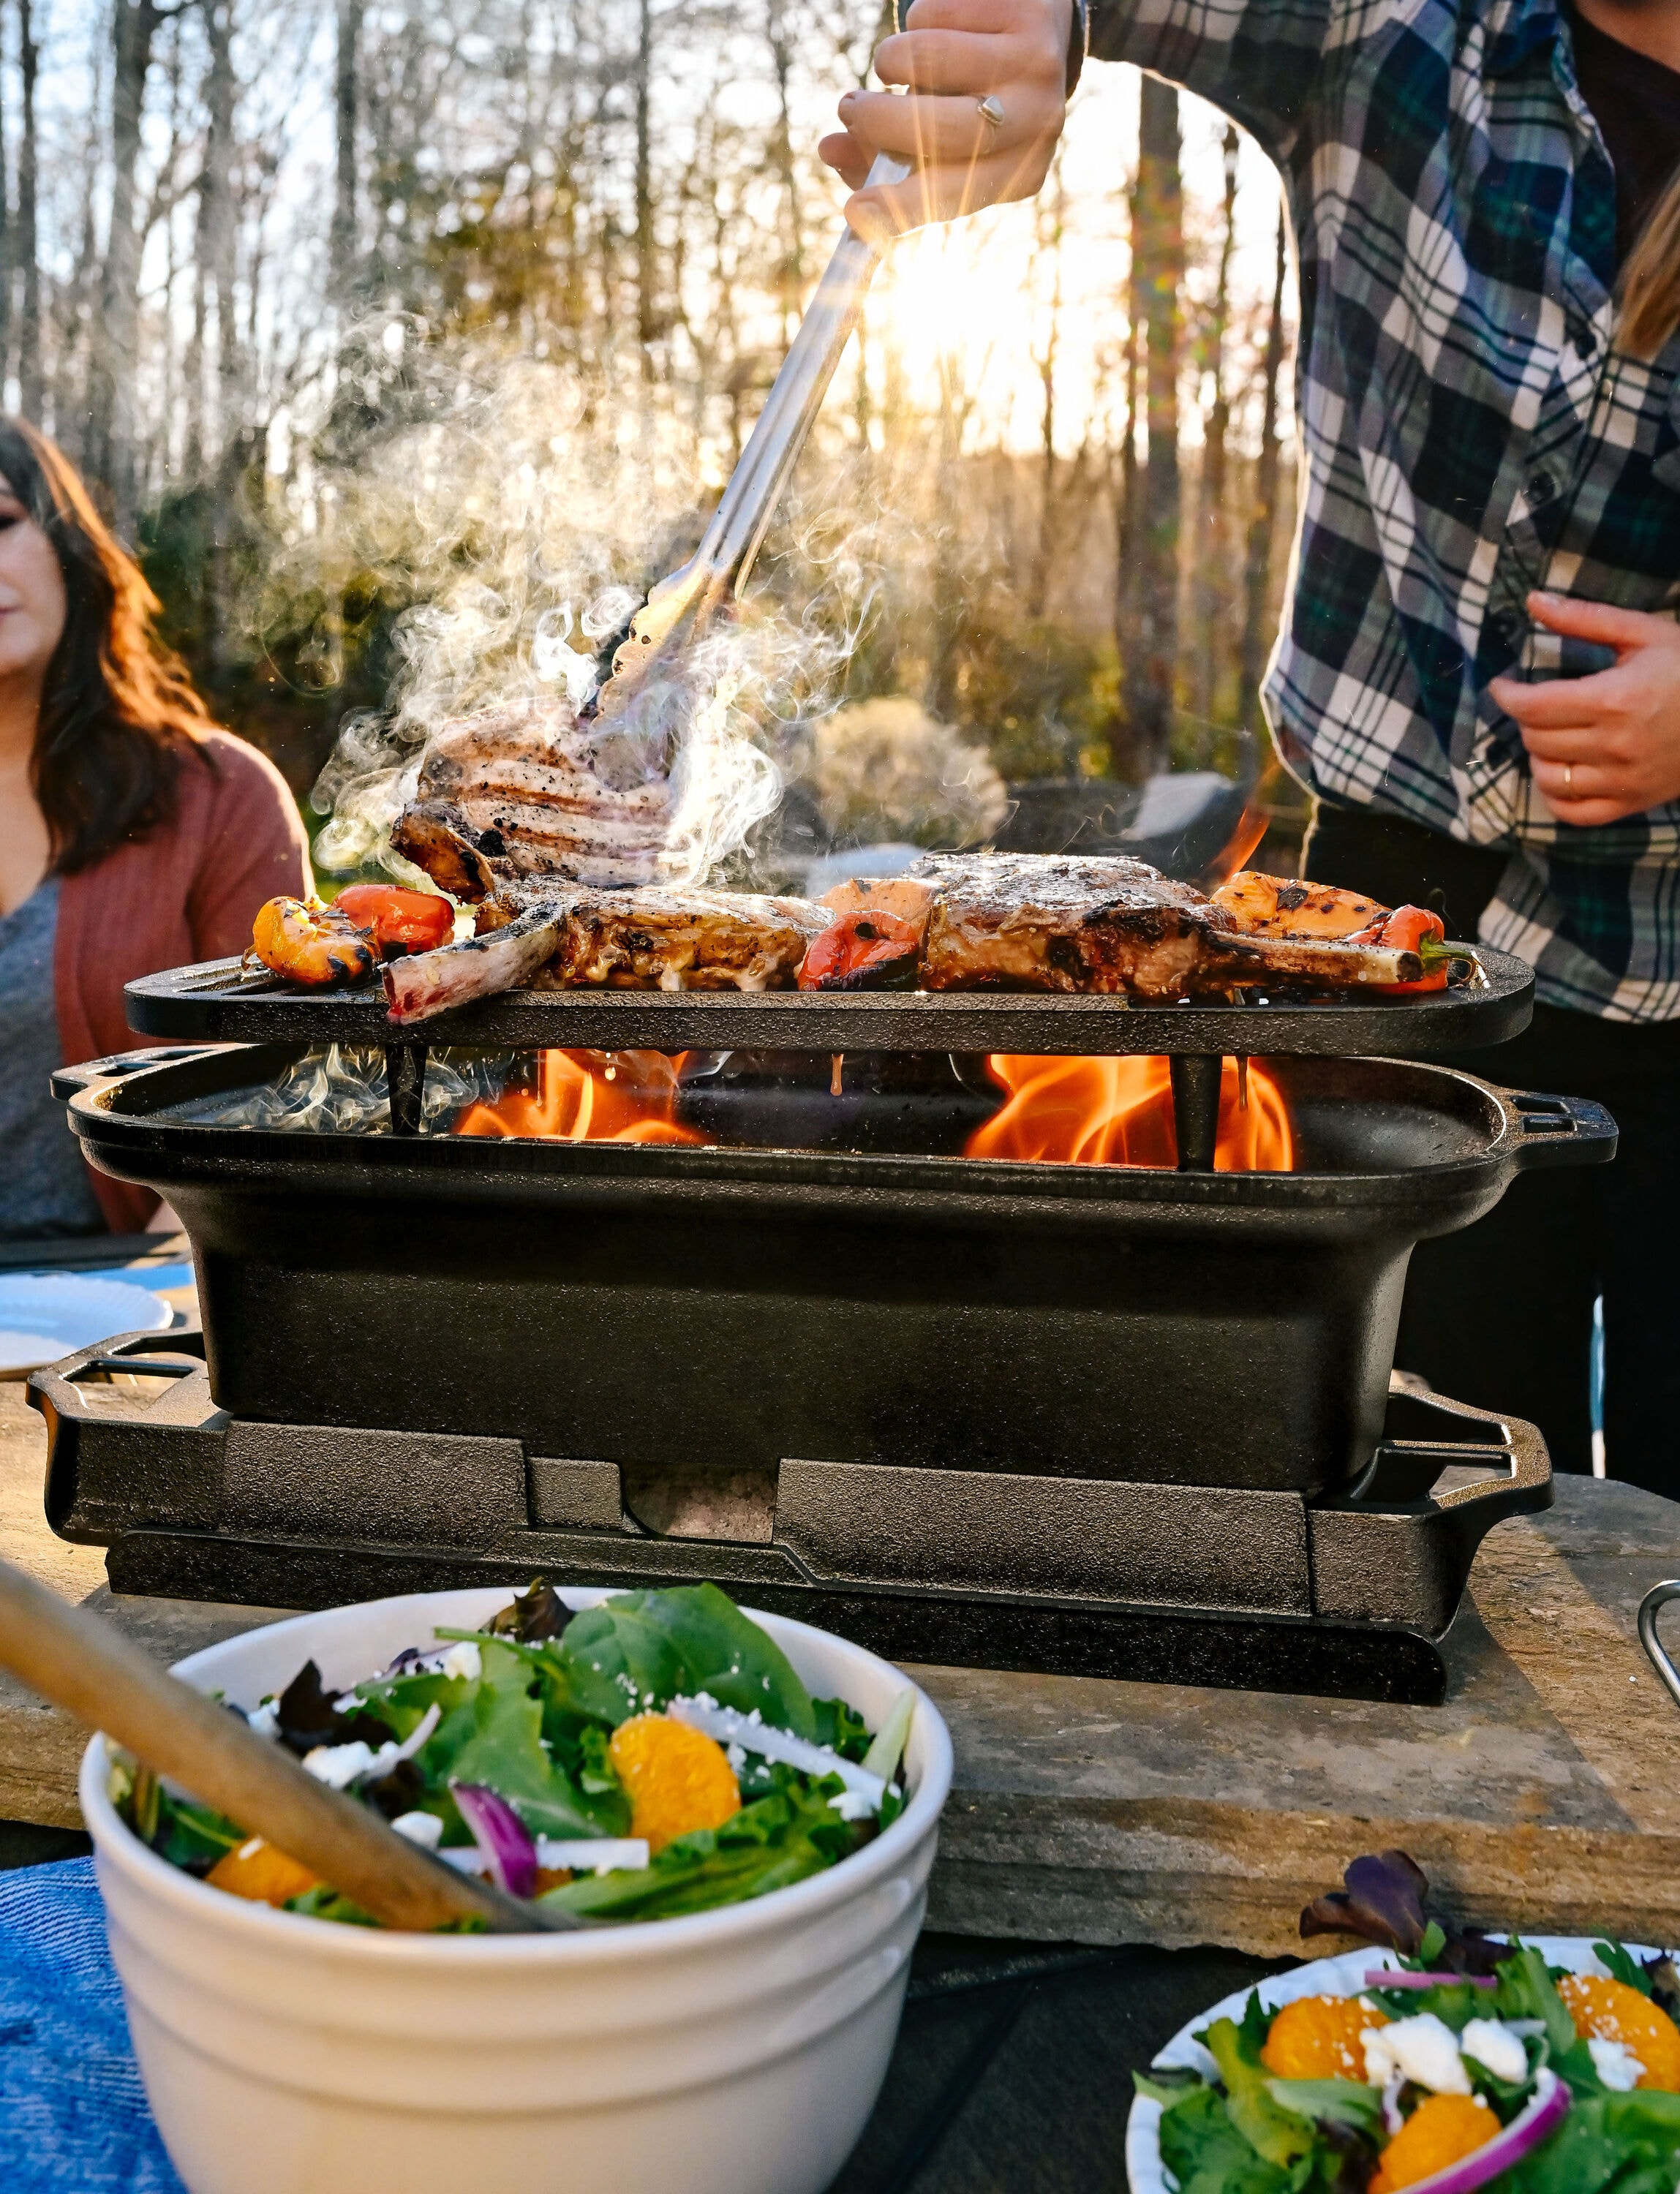 Lodge Cast Iron Sportsman's Grill - $58.95 from $107.99!